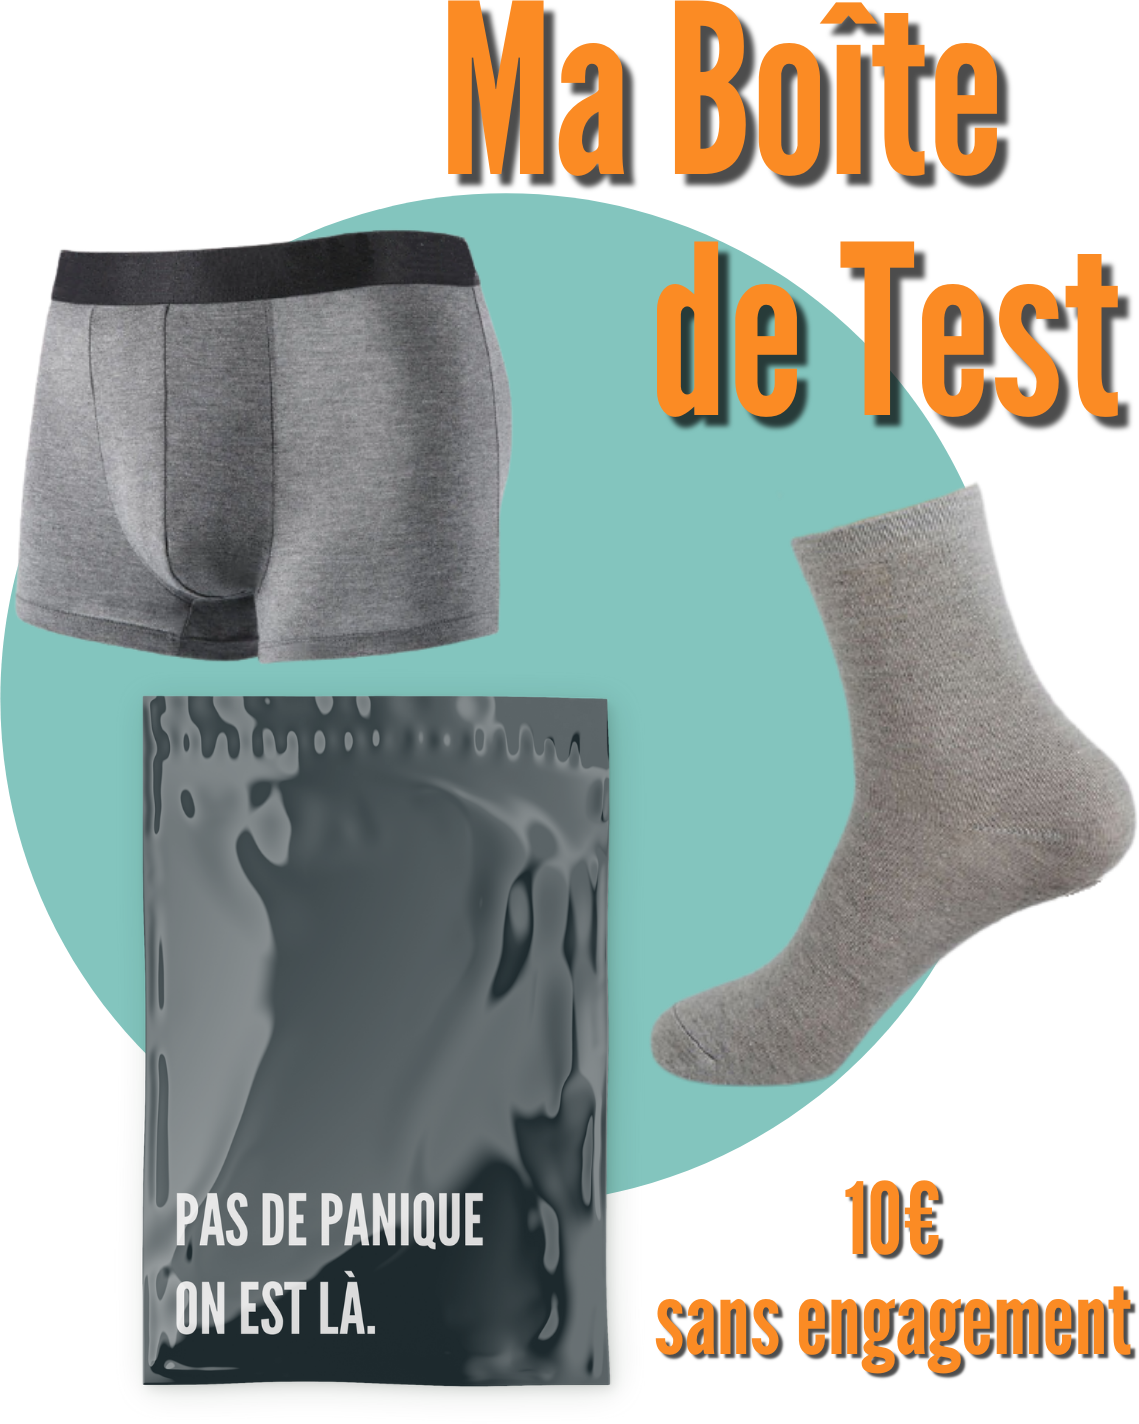 825-boite-test.png